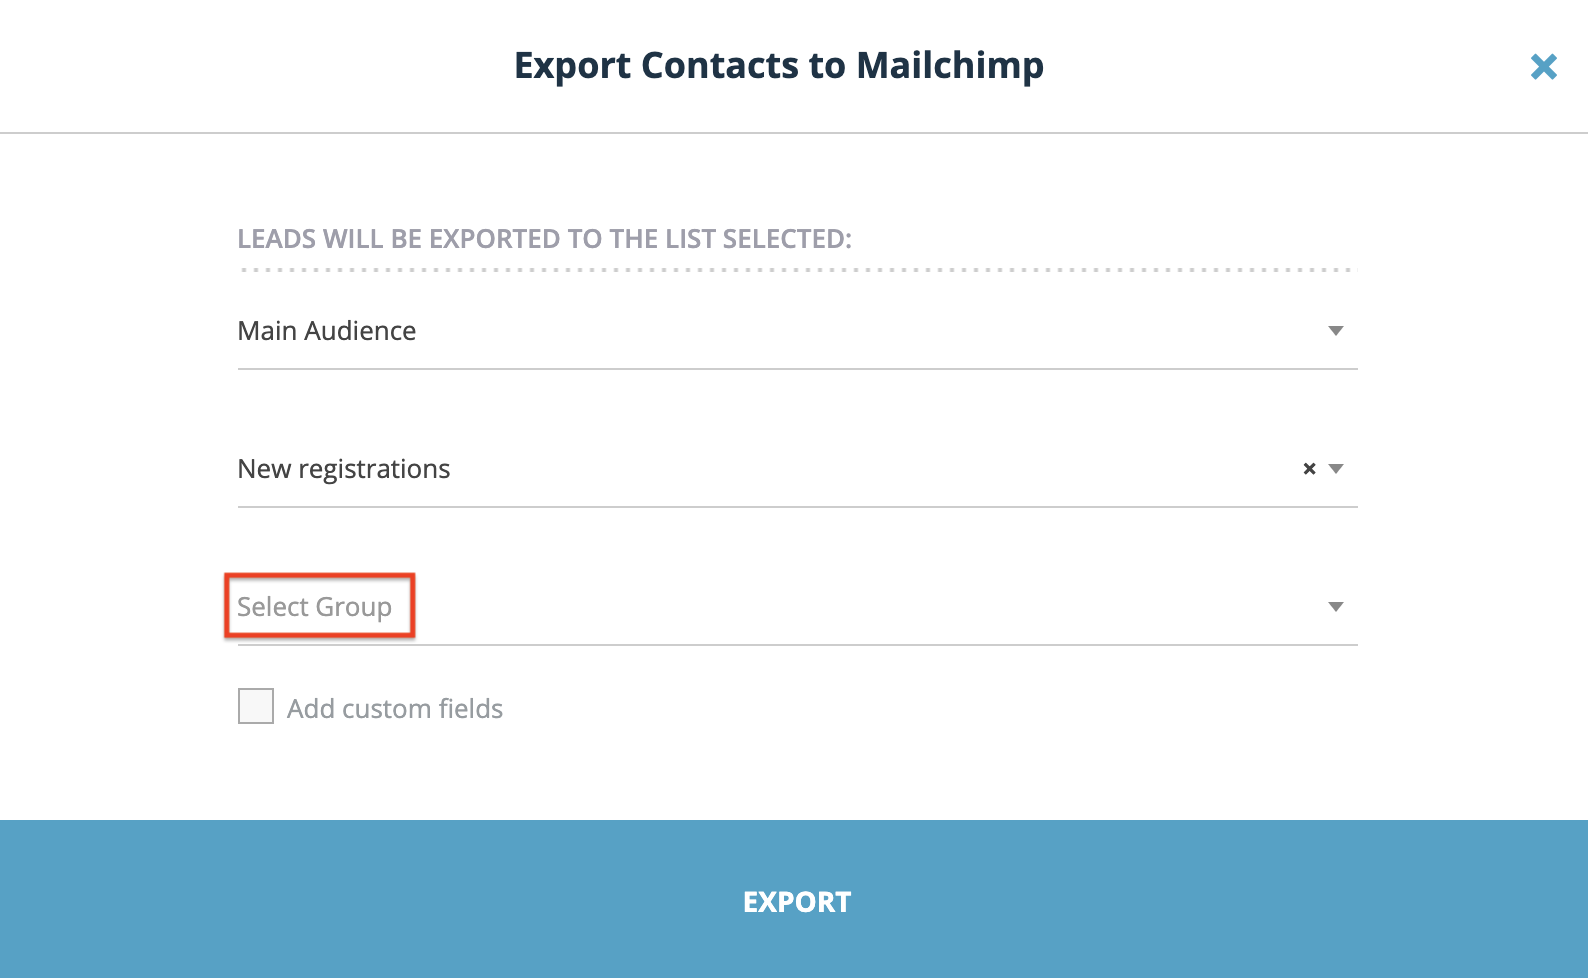 export-contacts-to-mailchimp-select-group-teamgate.png